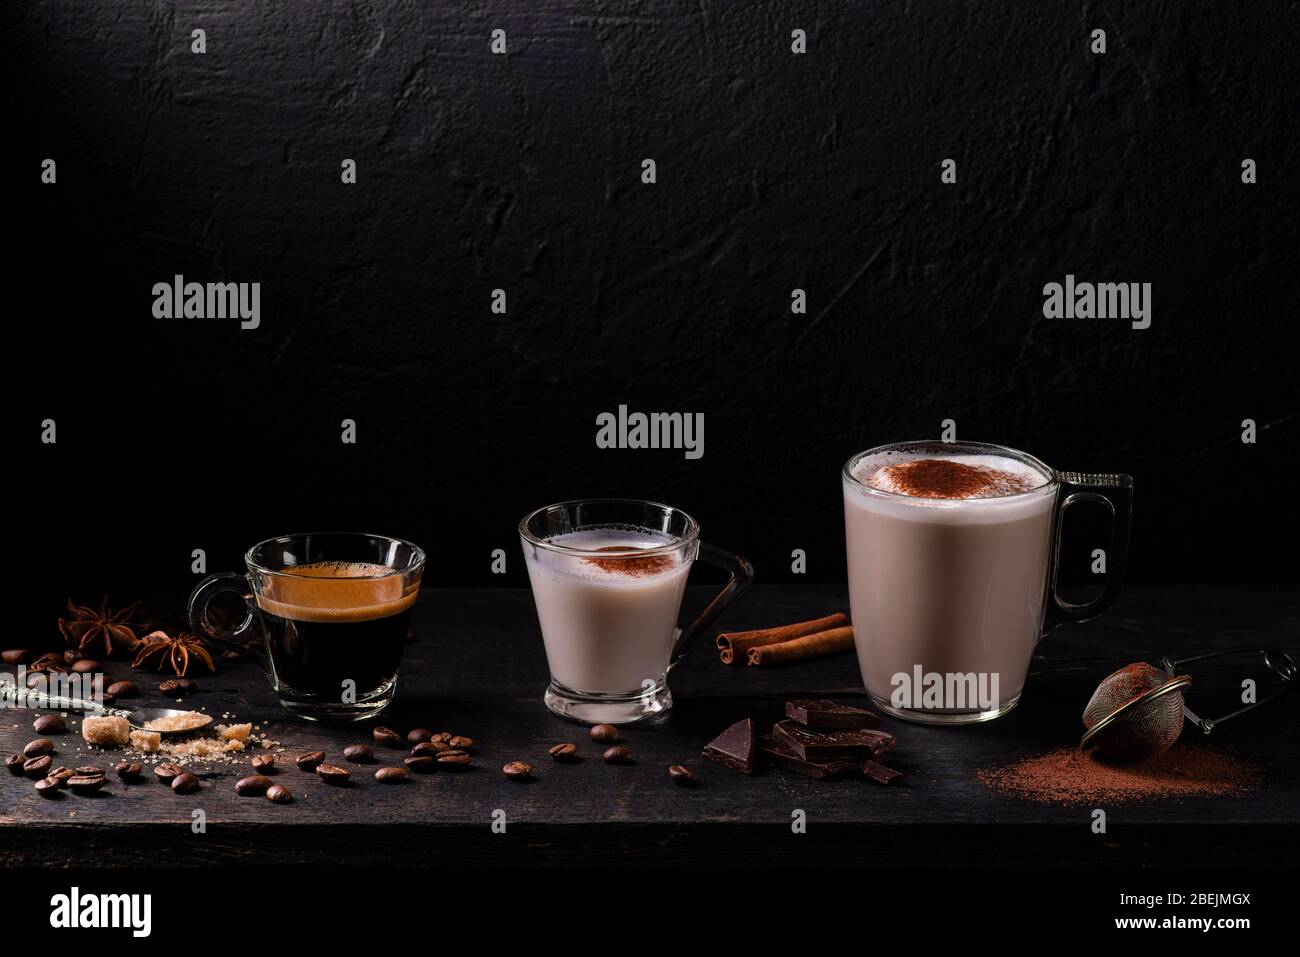 in the foreground, some types of espresso, latte macchiato and cappuccino with a sprinkling of cocoa powder. Stock Photo